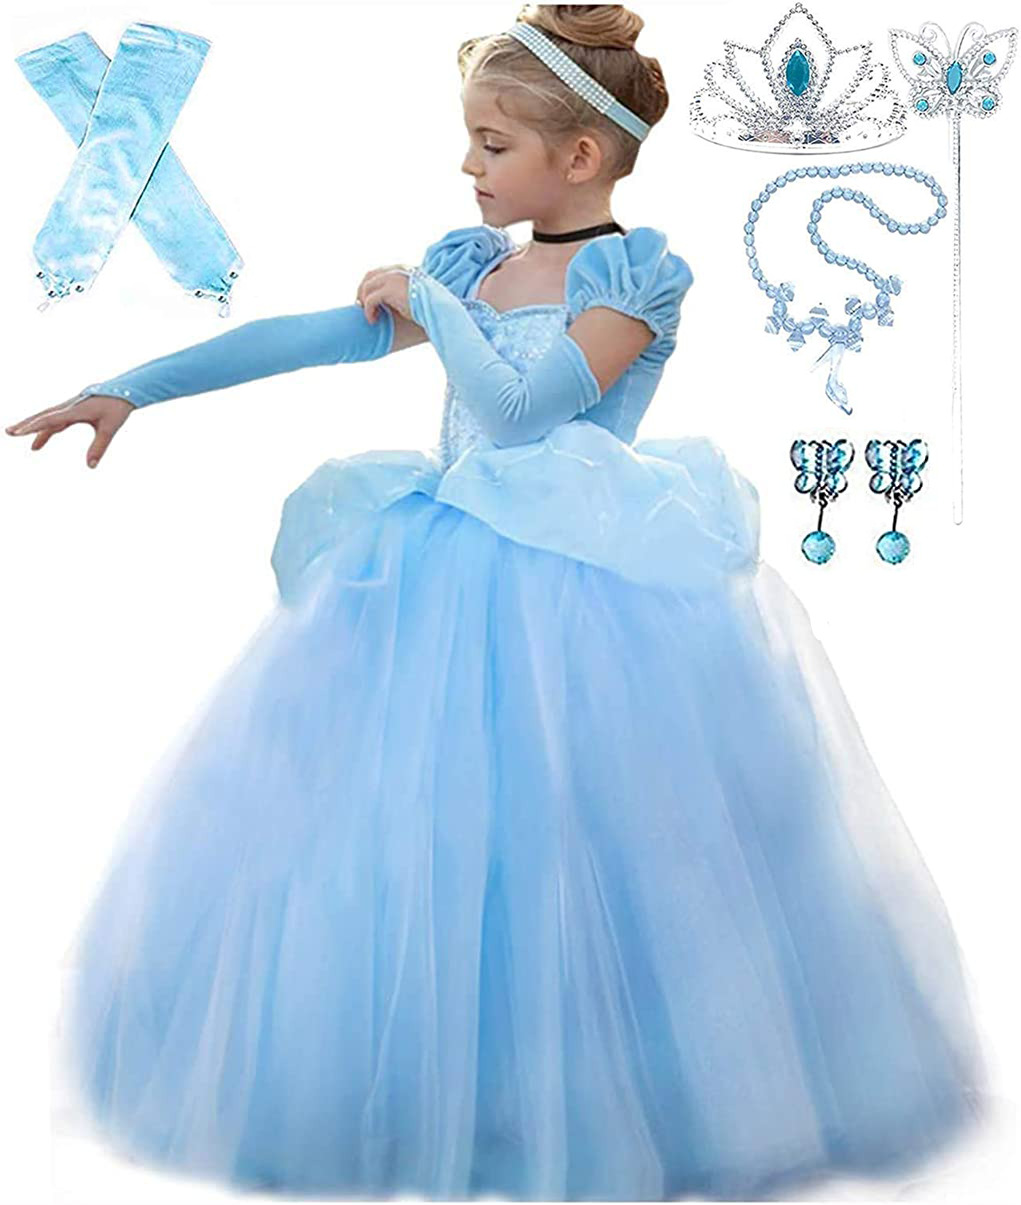 Special Edition Cinderella Party Embroidered Dress up Costume with Accessories